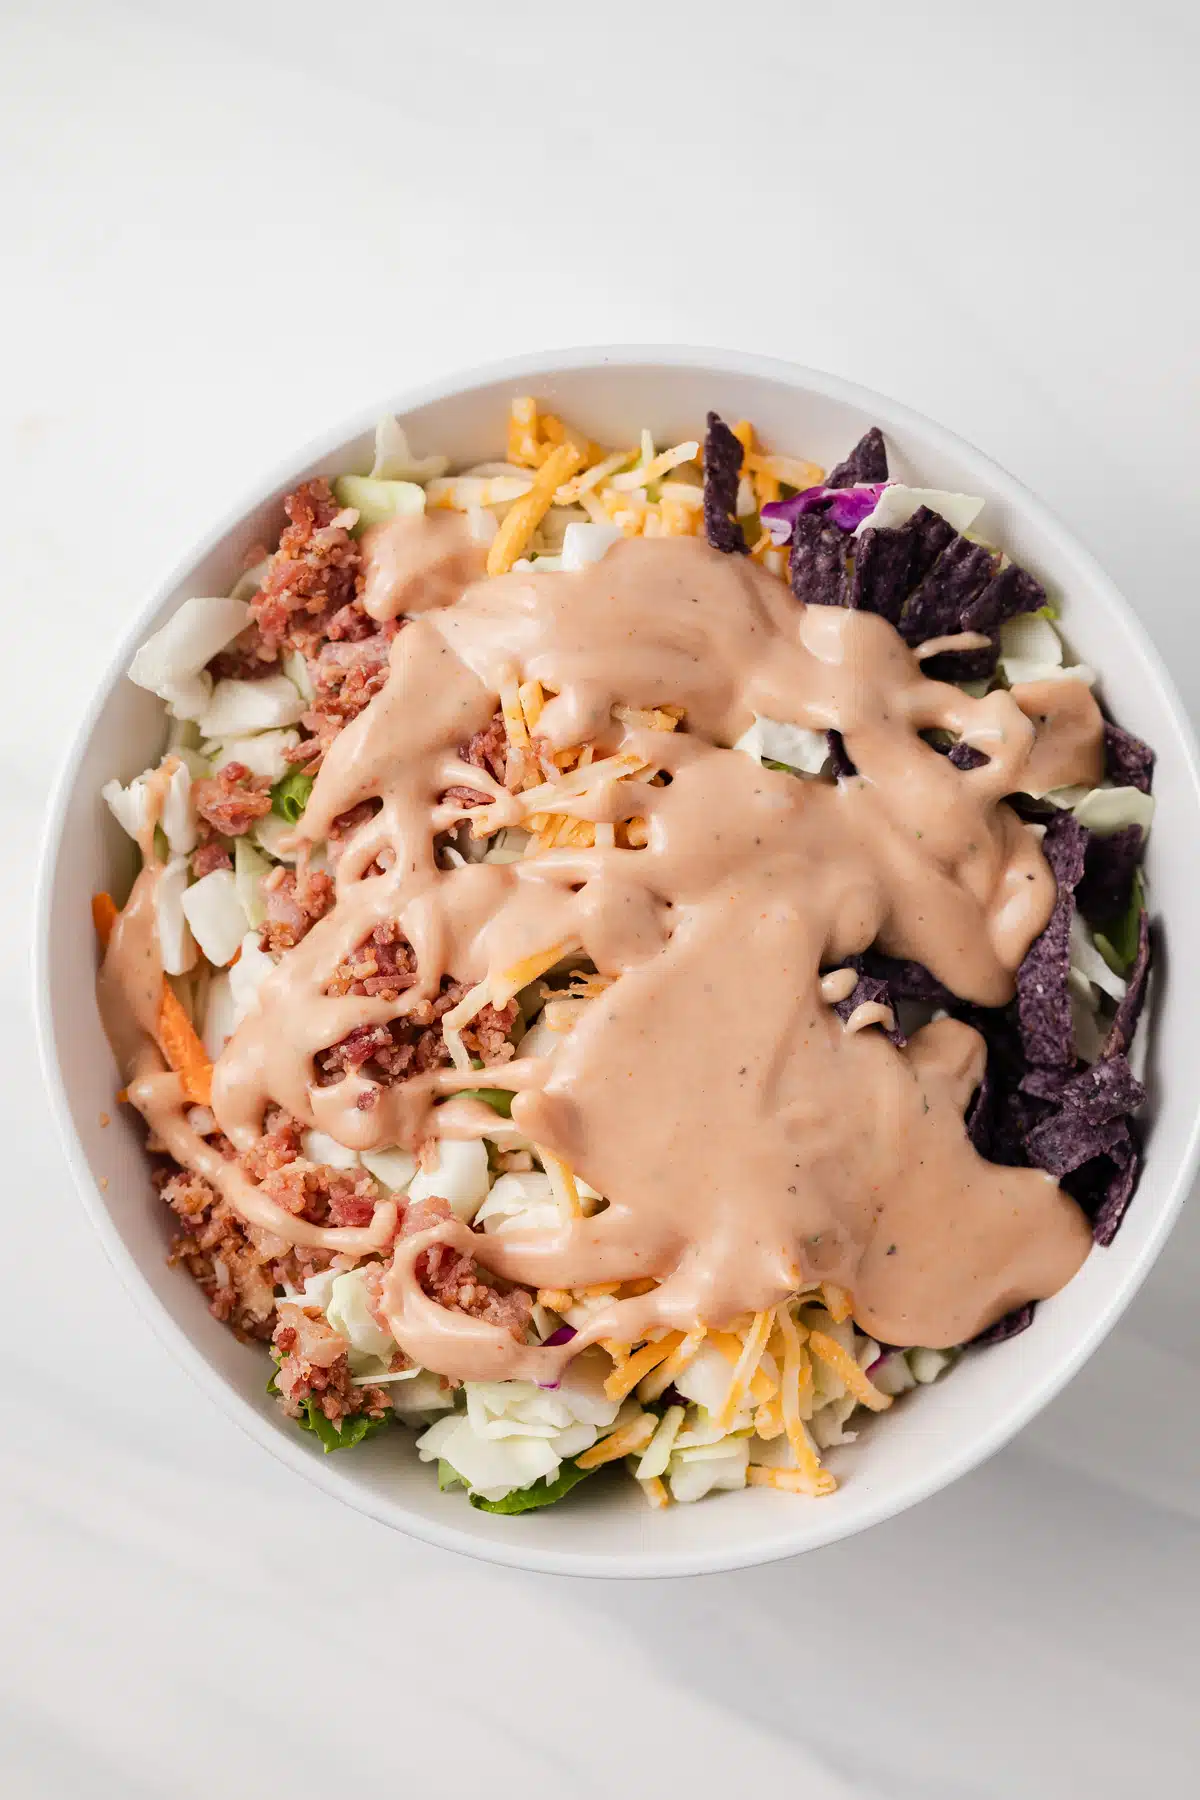 BBQ ranch dressing drizzled over salad in white bowl.